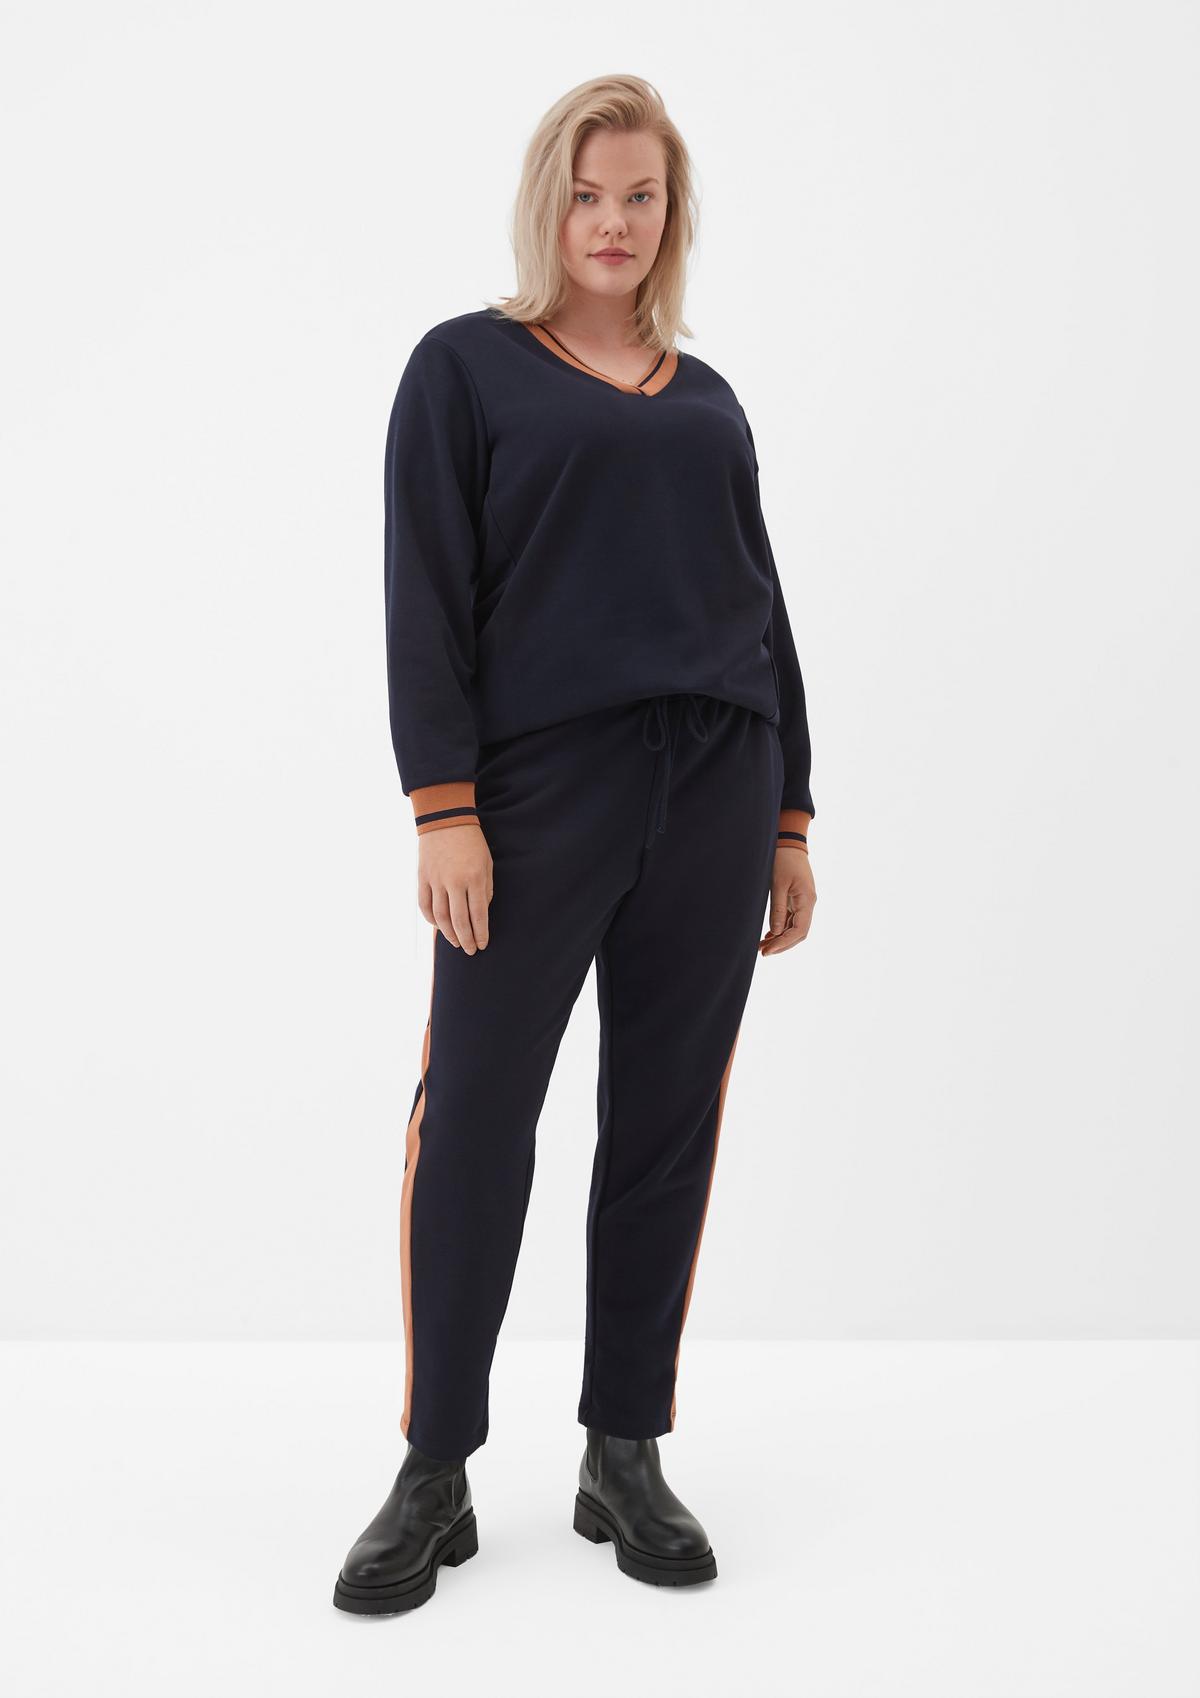 s.Oliver Tracksuit bottoms with tuxedo stripes